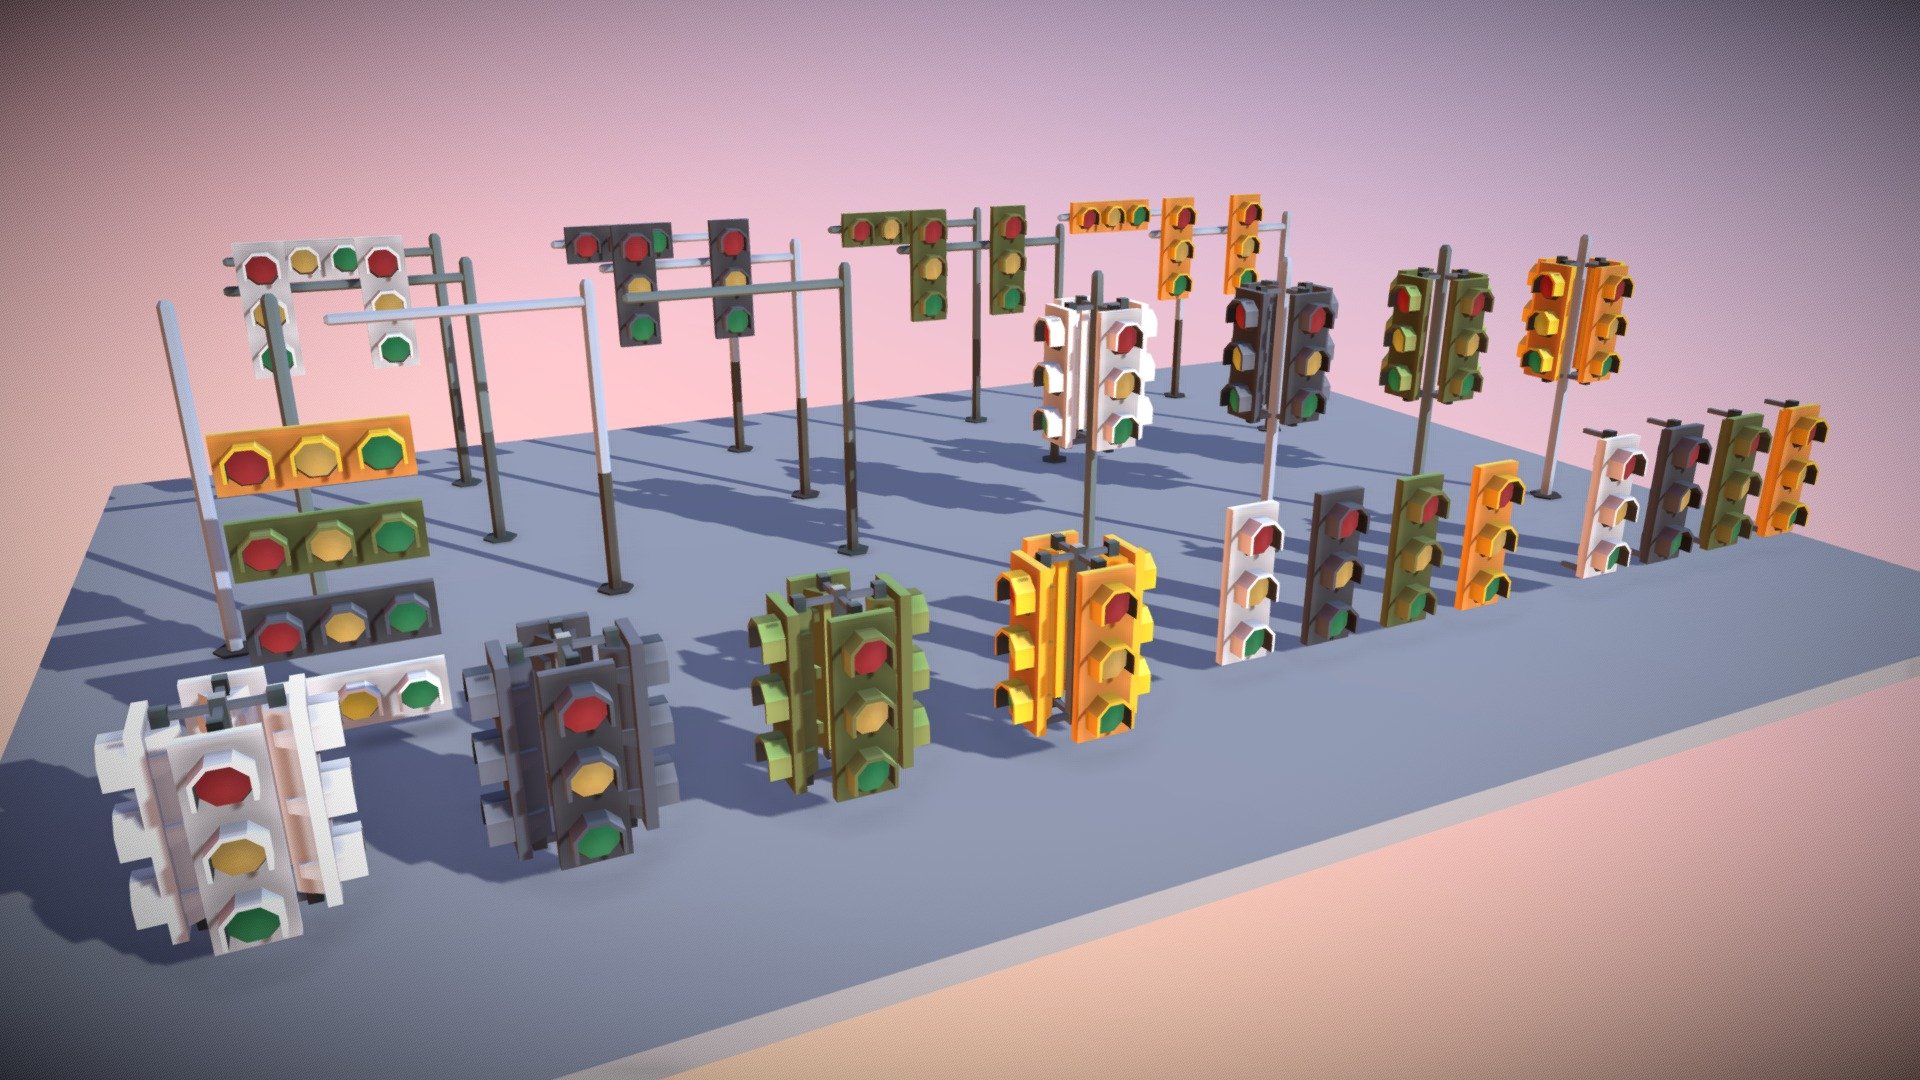 Tarbo - CITY &lsquo;Traffic Lights'
A low poly asset pack of traffic lights polygonal style game.
Modular parts are easy to piece together in a variety of combinations.
This product is designed for CITY Pack


Download here

FEATURES



32 useful prefabss

Included Modular Parts

Simple polygonal style

Includes demo scene

Designed to integrate well with TARBO - CITY Pack

Share with CITY Pack as a single material (and texture) - Optimized meshes useful for TopDown, RPG, RTS, mobile, AR, VR, PC


UPDATES &amp; NEWS



WEBSITE
 - TARBO - CITY 'Traffic Lights' - 3D model by Tarbo Studios (@tarboStudios) 3d model